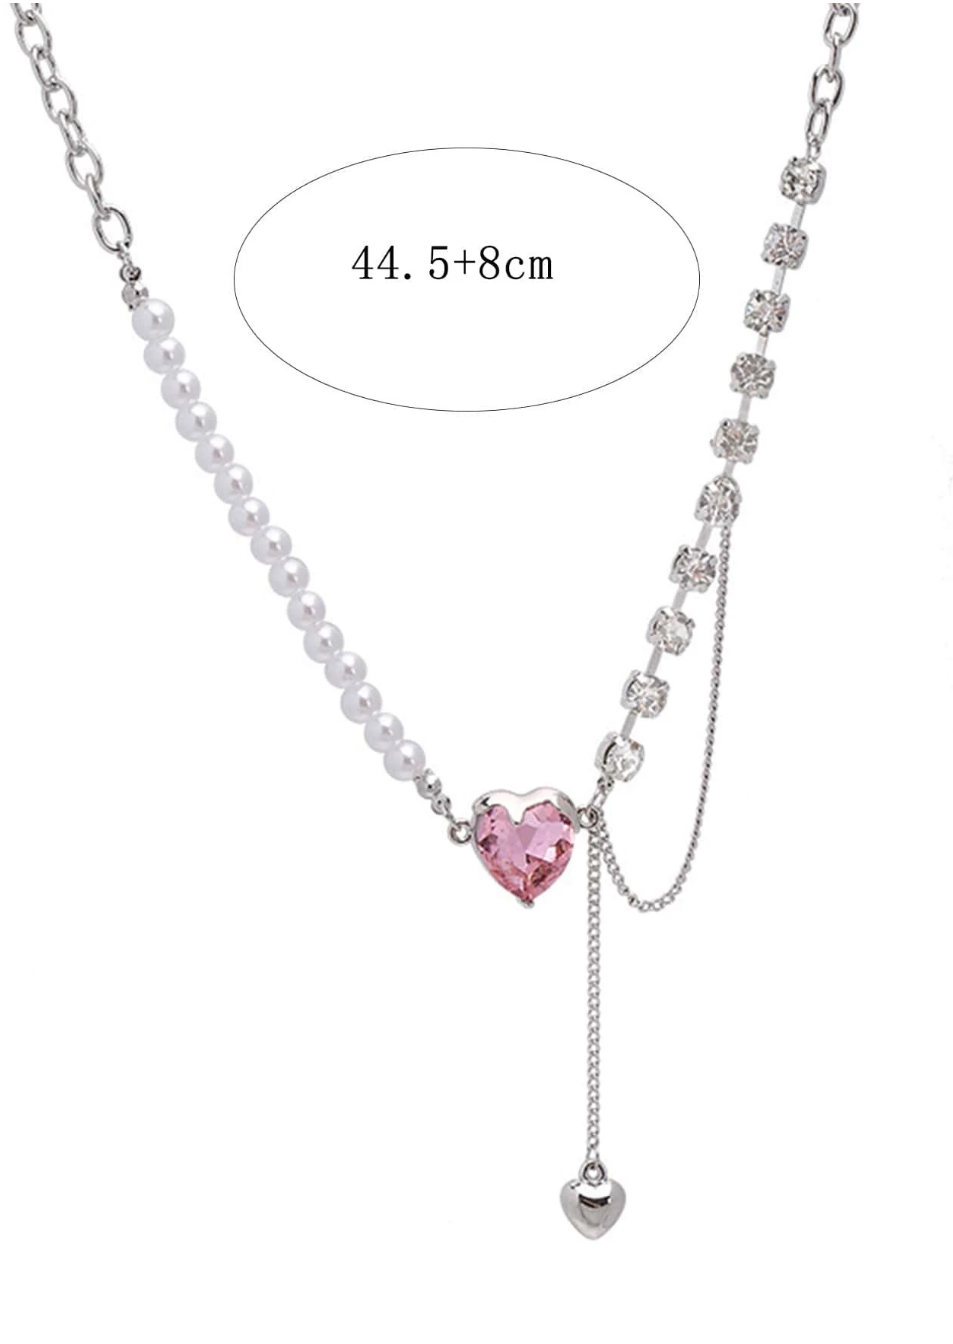 Dazzling Love: Y2K Silver Heart Pendant Necklace with Glass Rhinestone Decor – Perfect Dating Gift for Women!